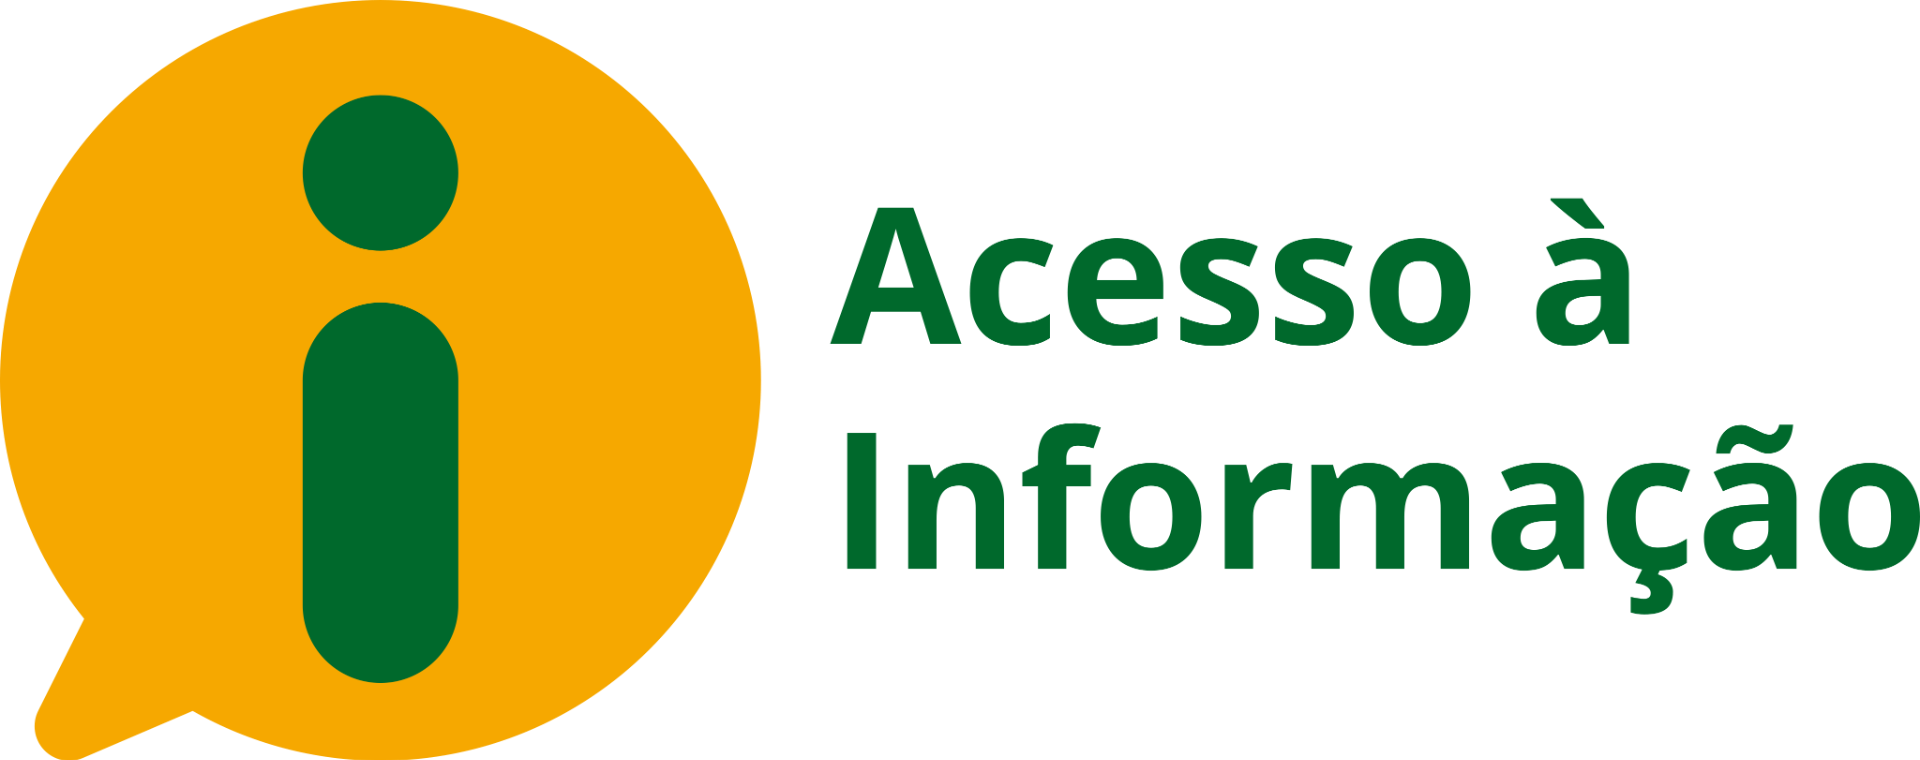 lei-acesso-informacao-logo.png